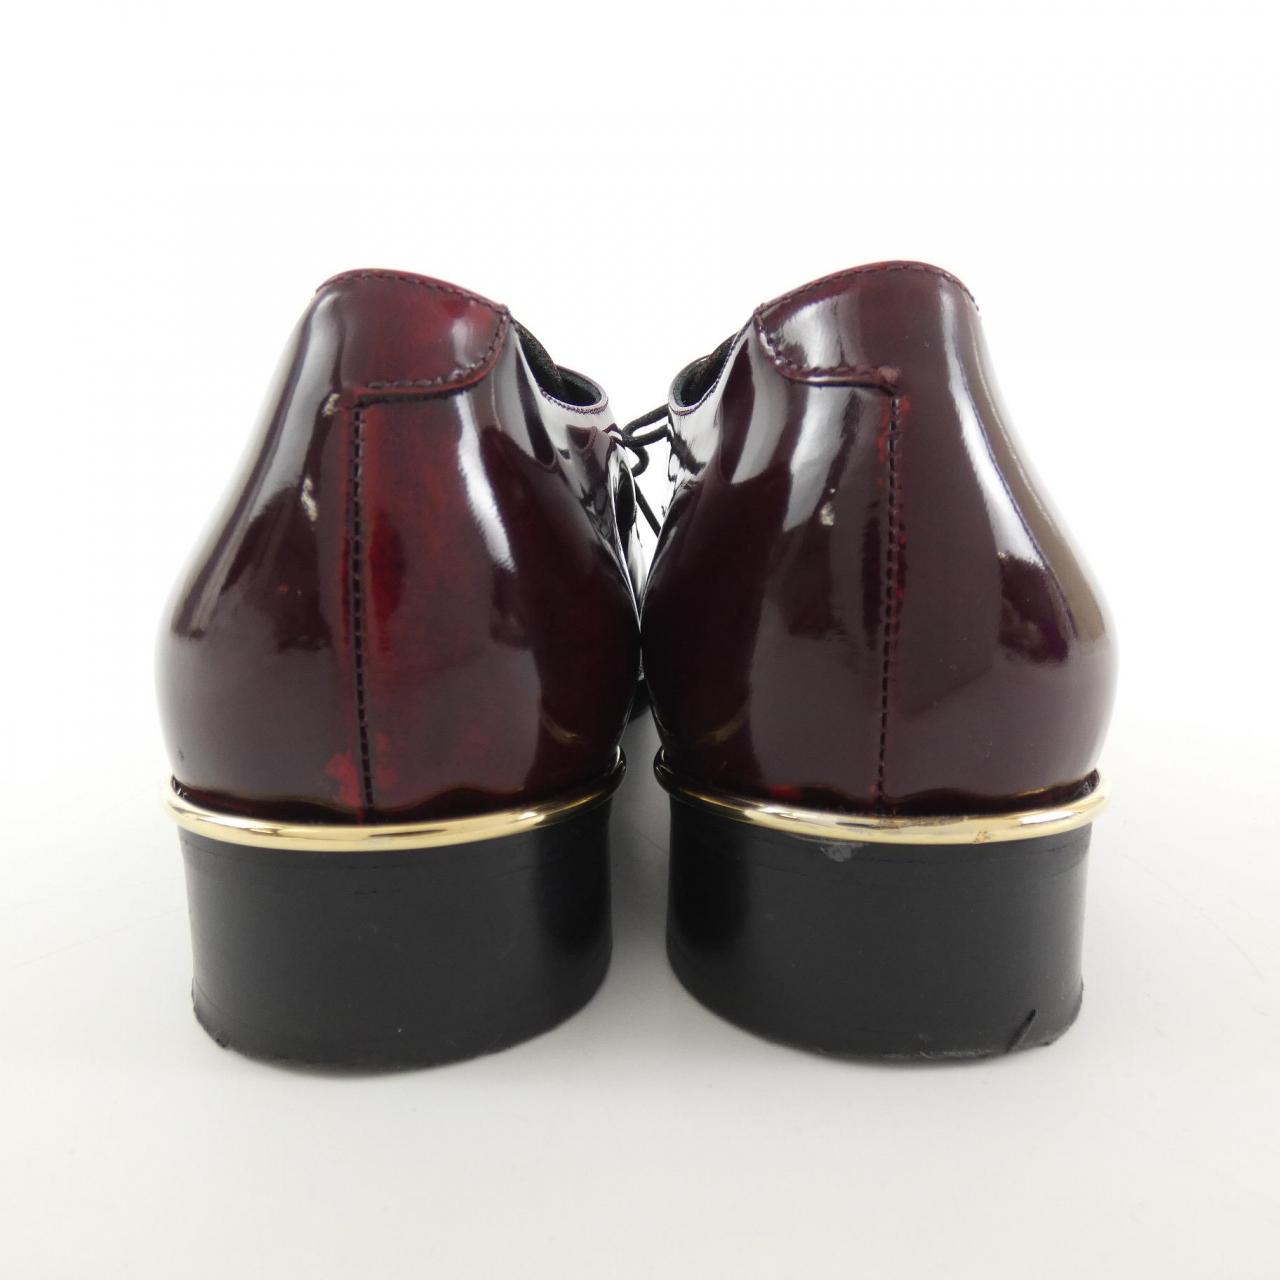 LUCA GROSSI shoes